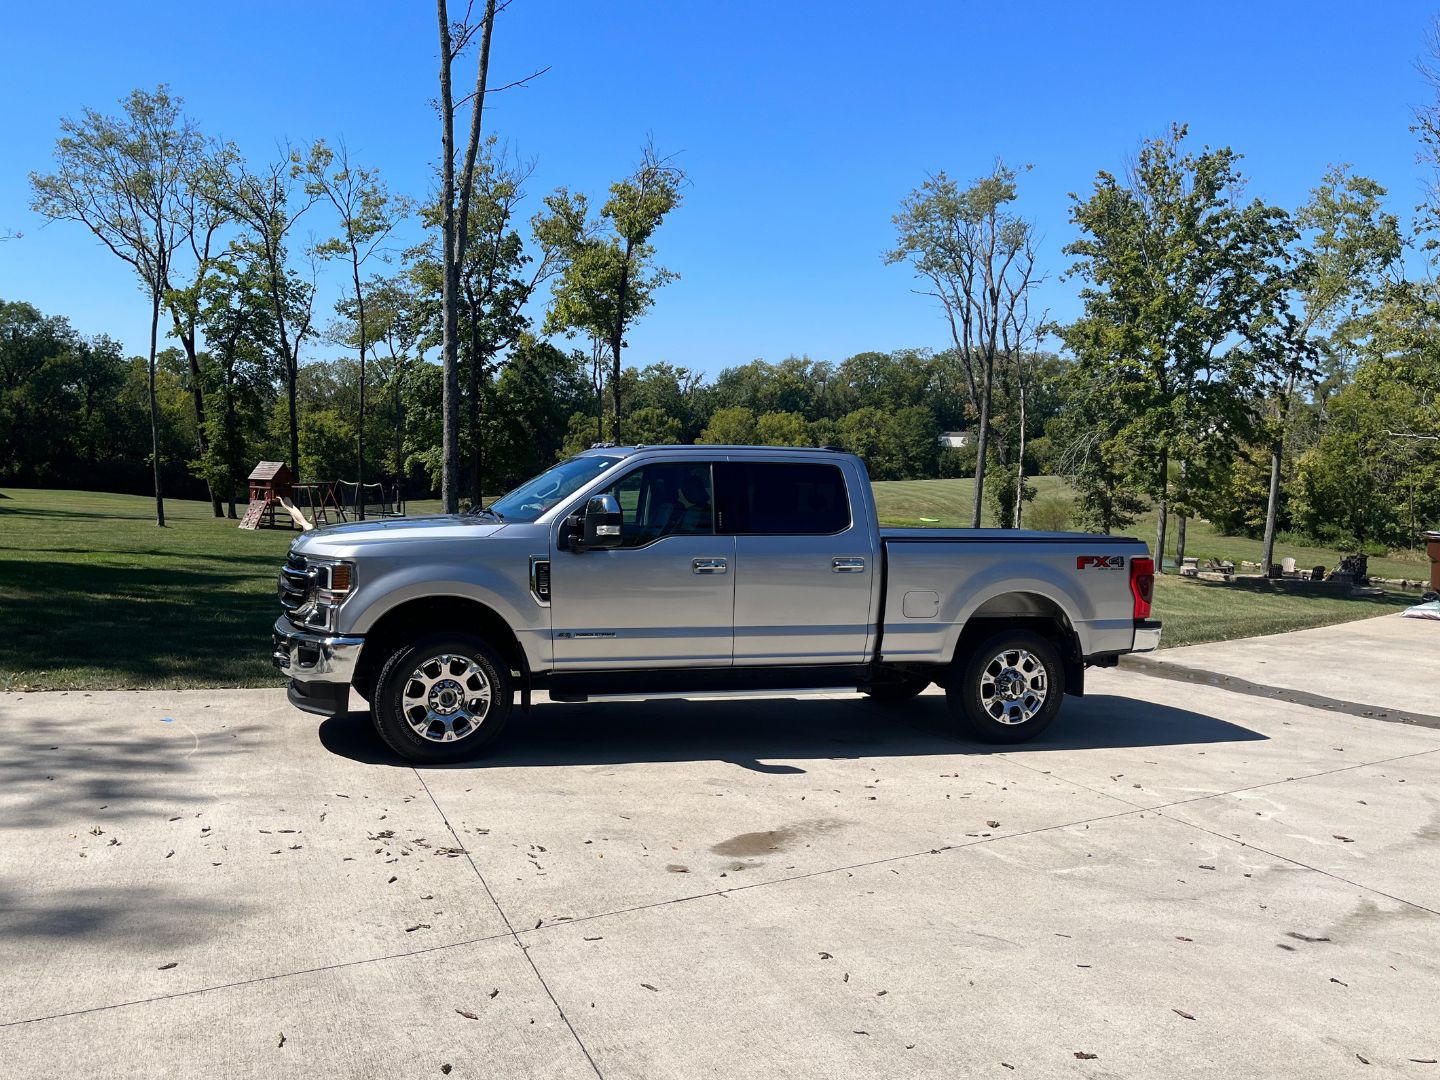 auto detailing service at shelbyville mobile detailing in shelbyville, ky 8